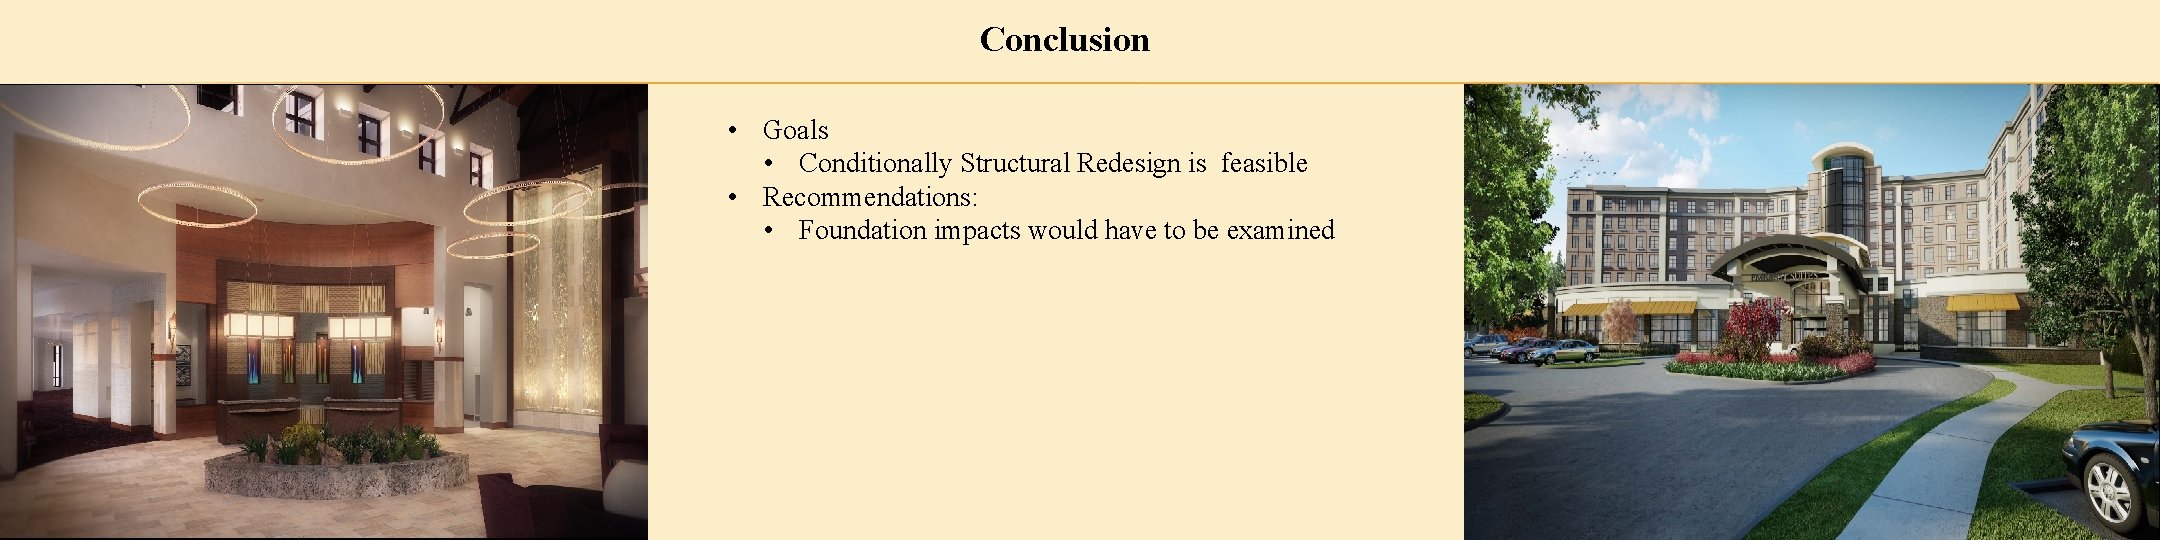 Conclusion • Goals • Conditionally Structural Redesign is feasible • Recommendations: • Foundation impacts